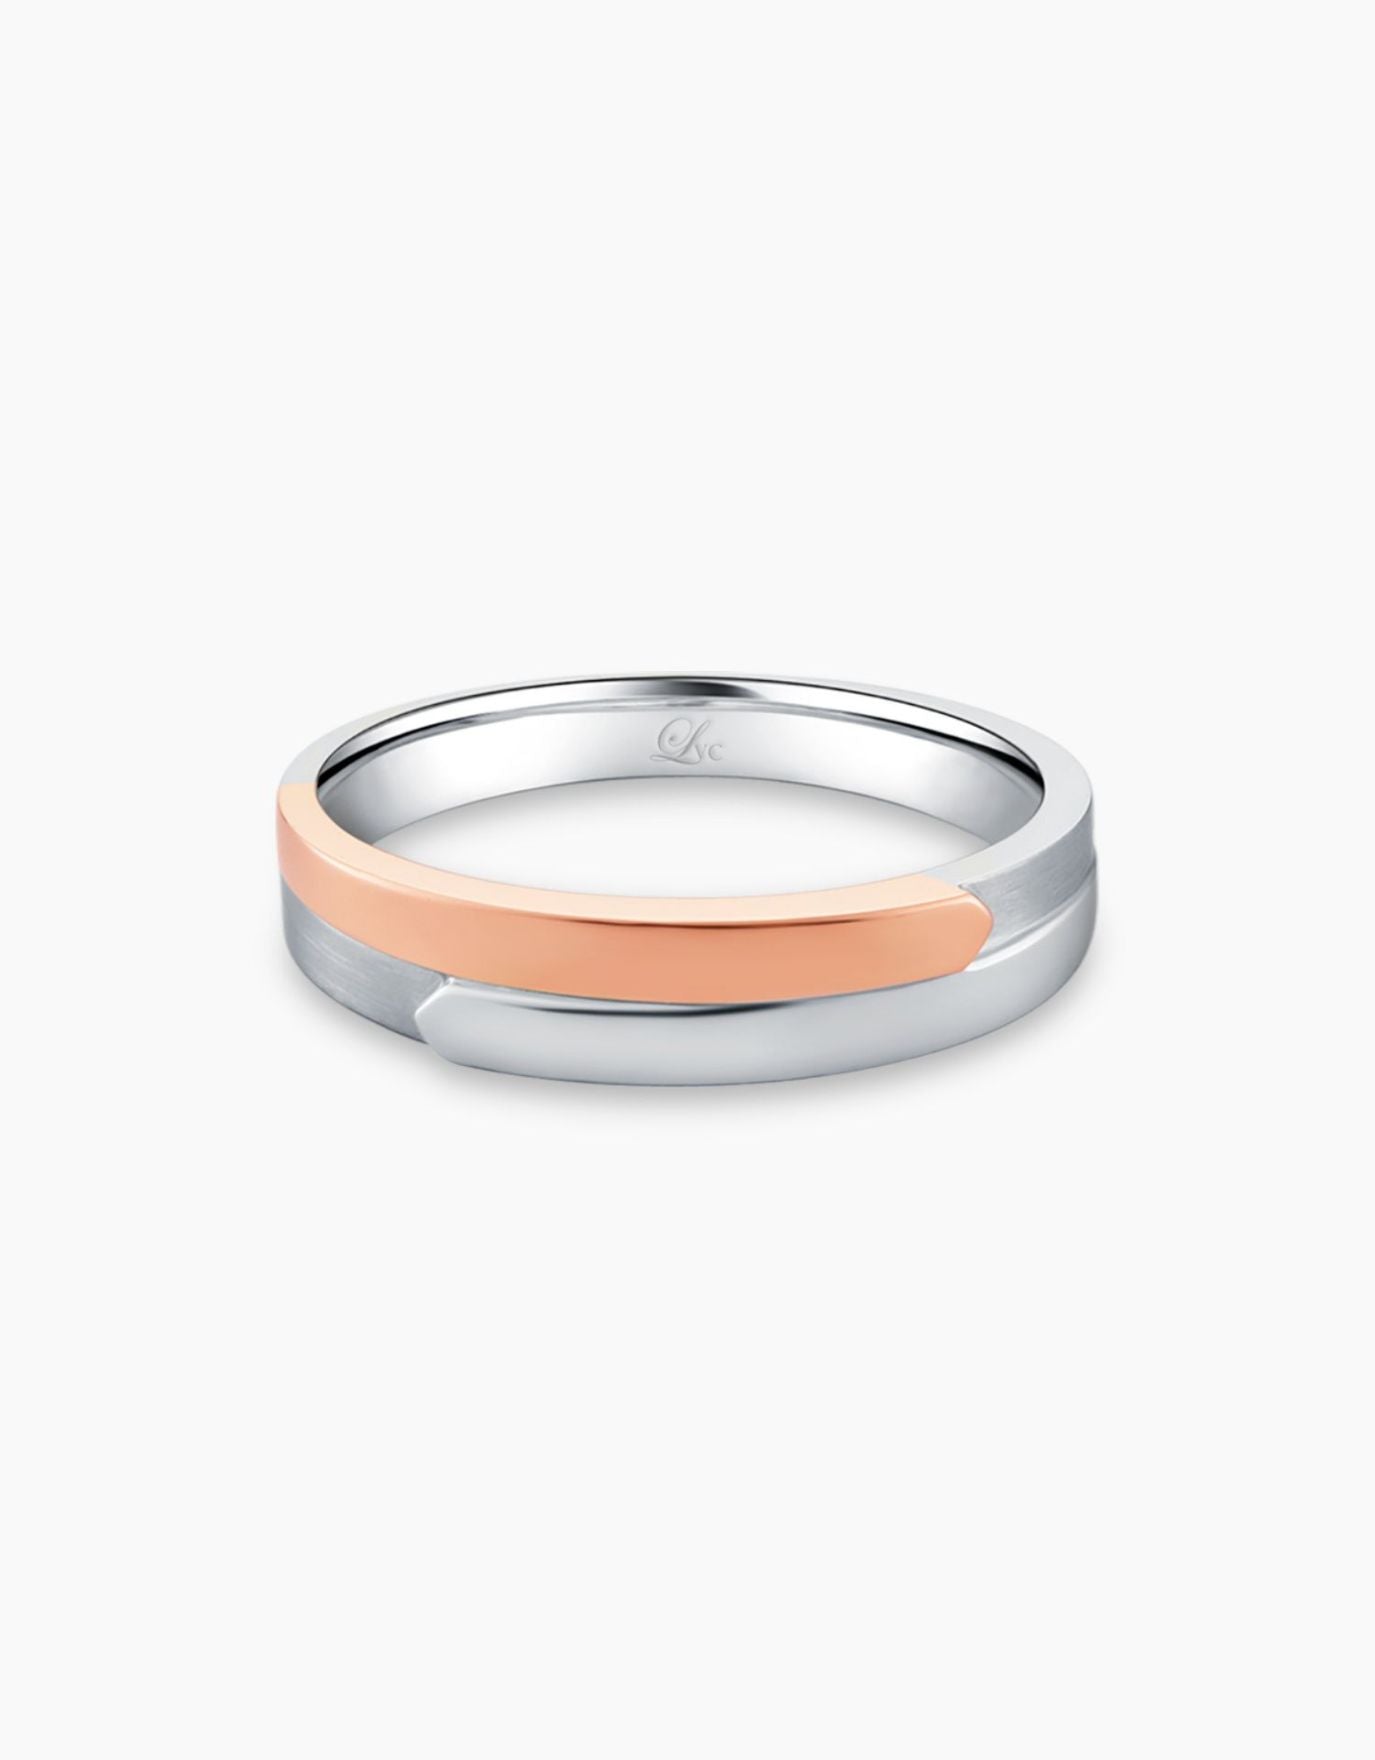 LVC Desirio Wedding Band in White Gold with Rose Gold Band